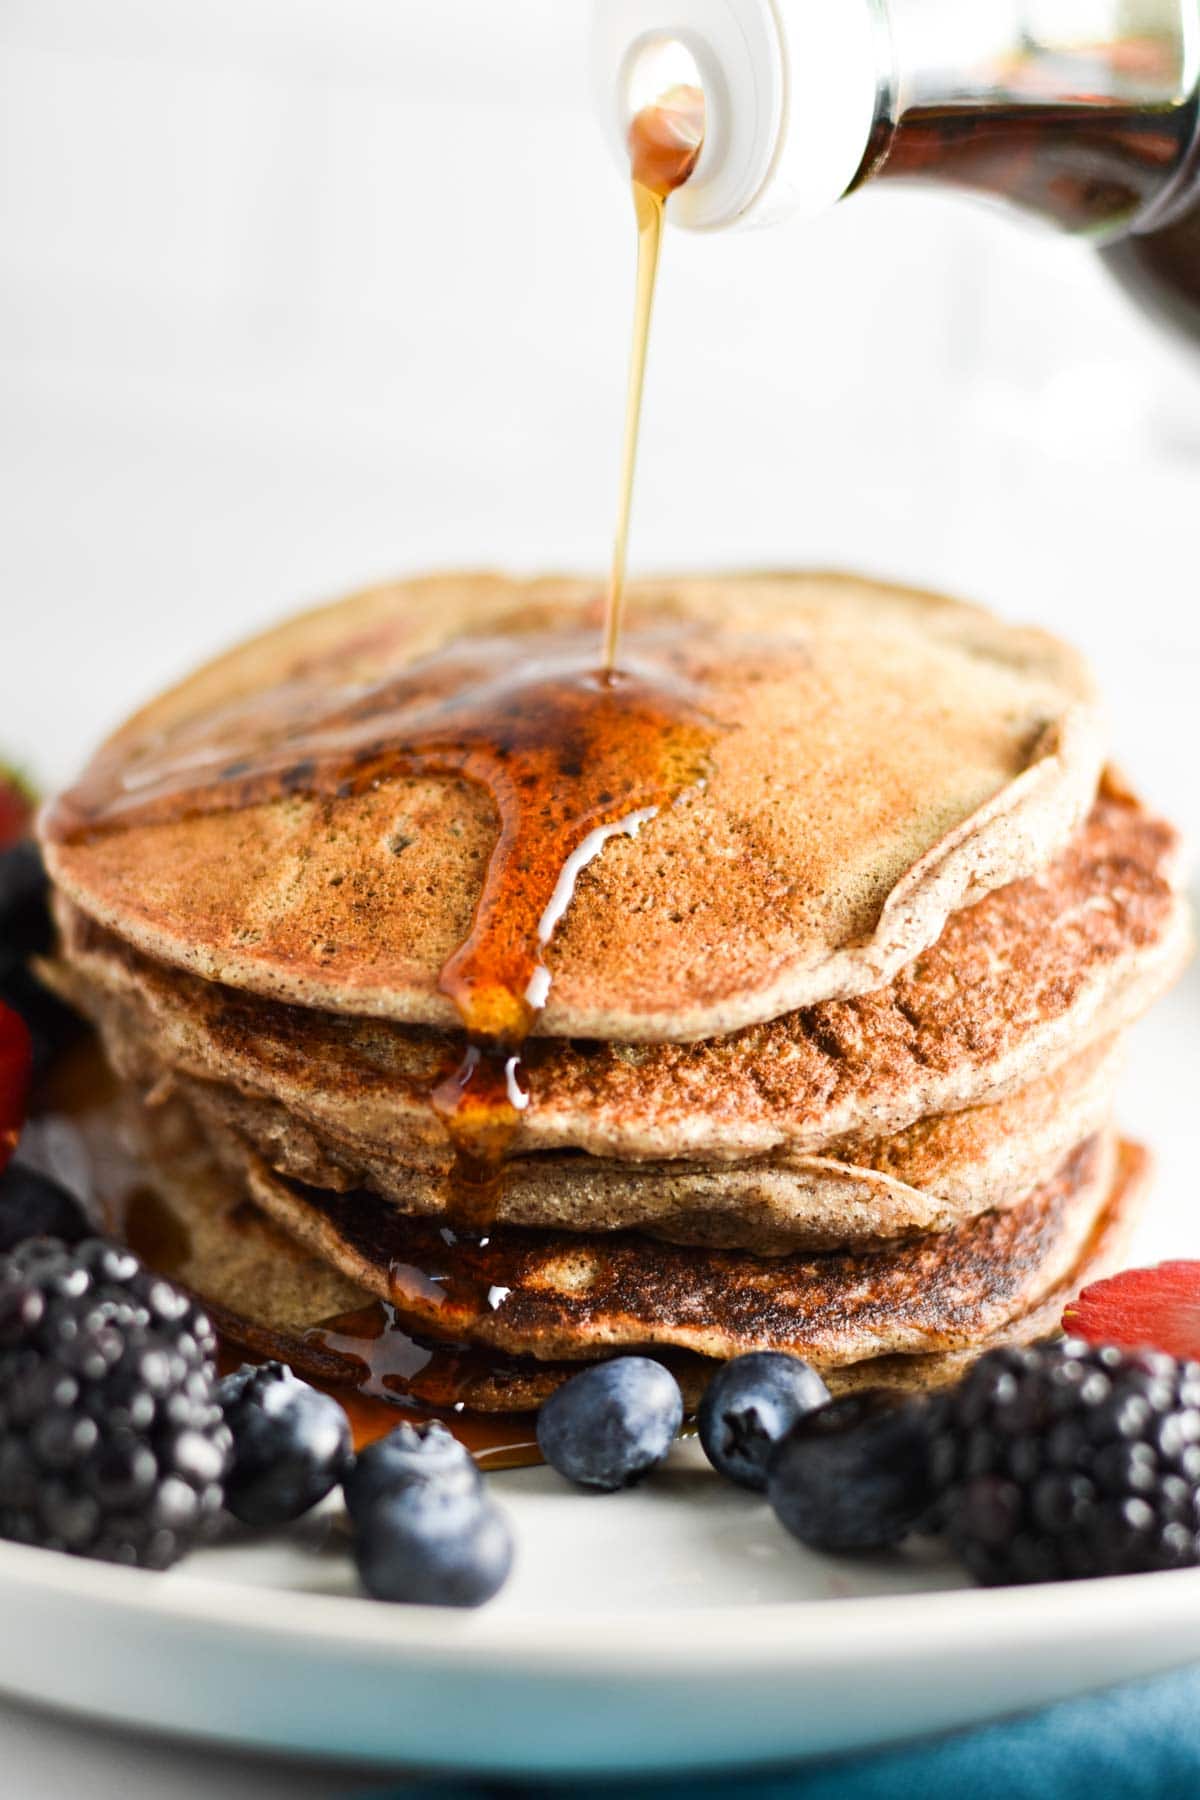 Syrup poured on top of buckwheat pancakes.